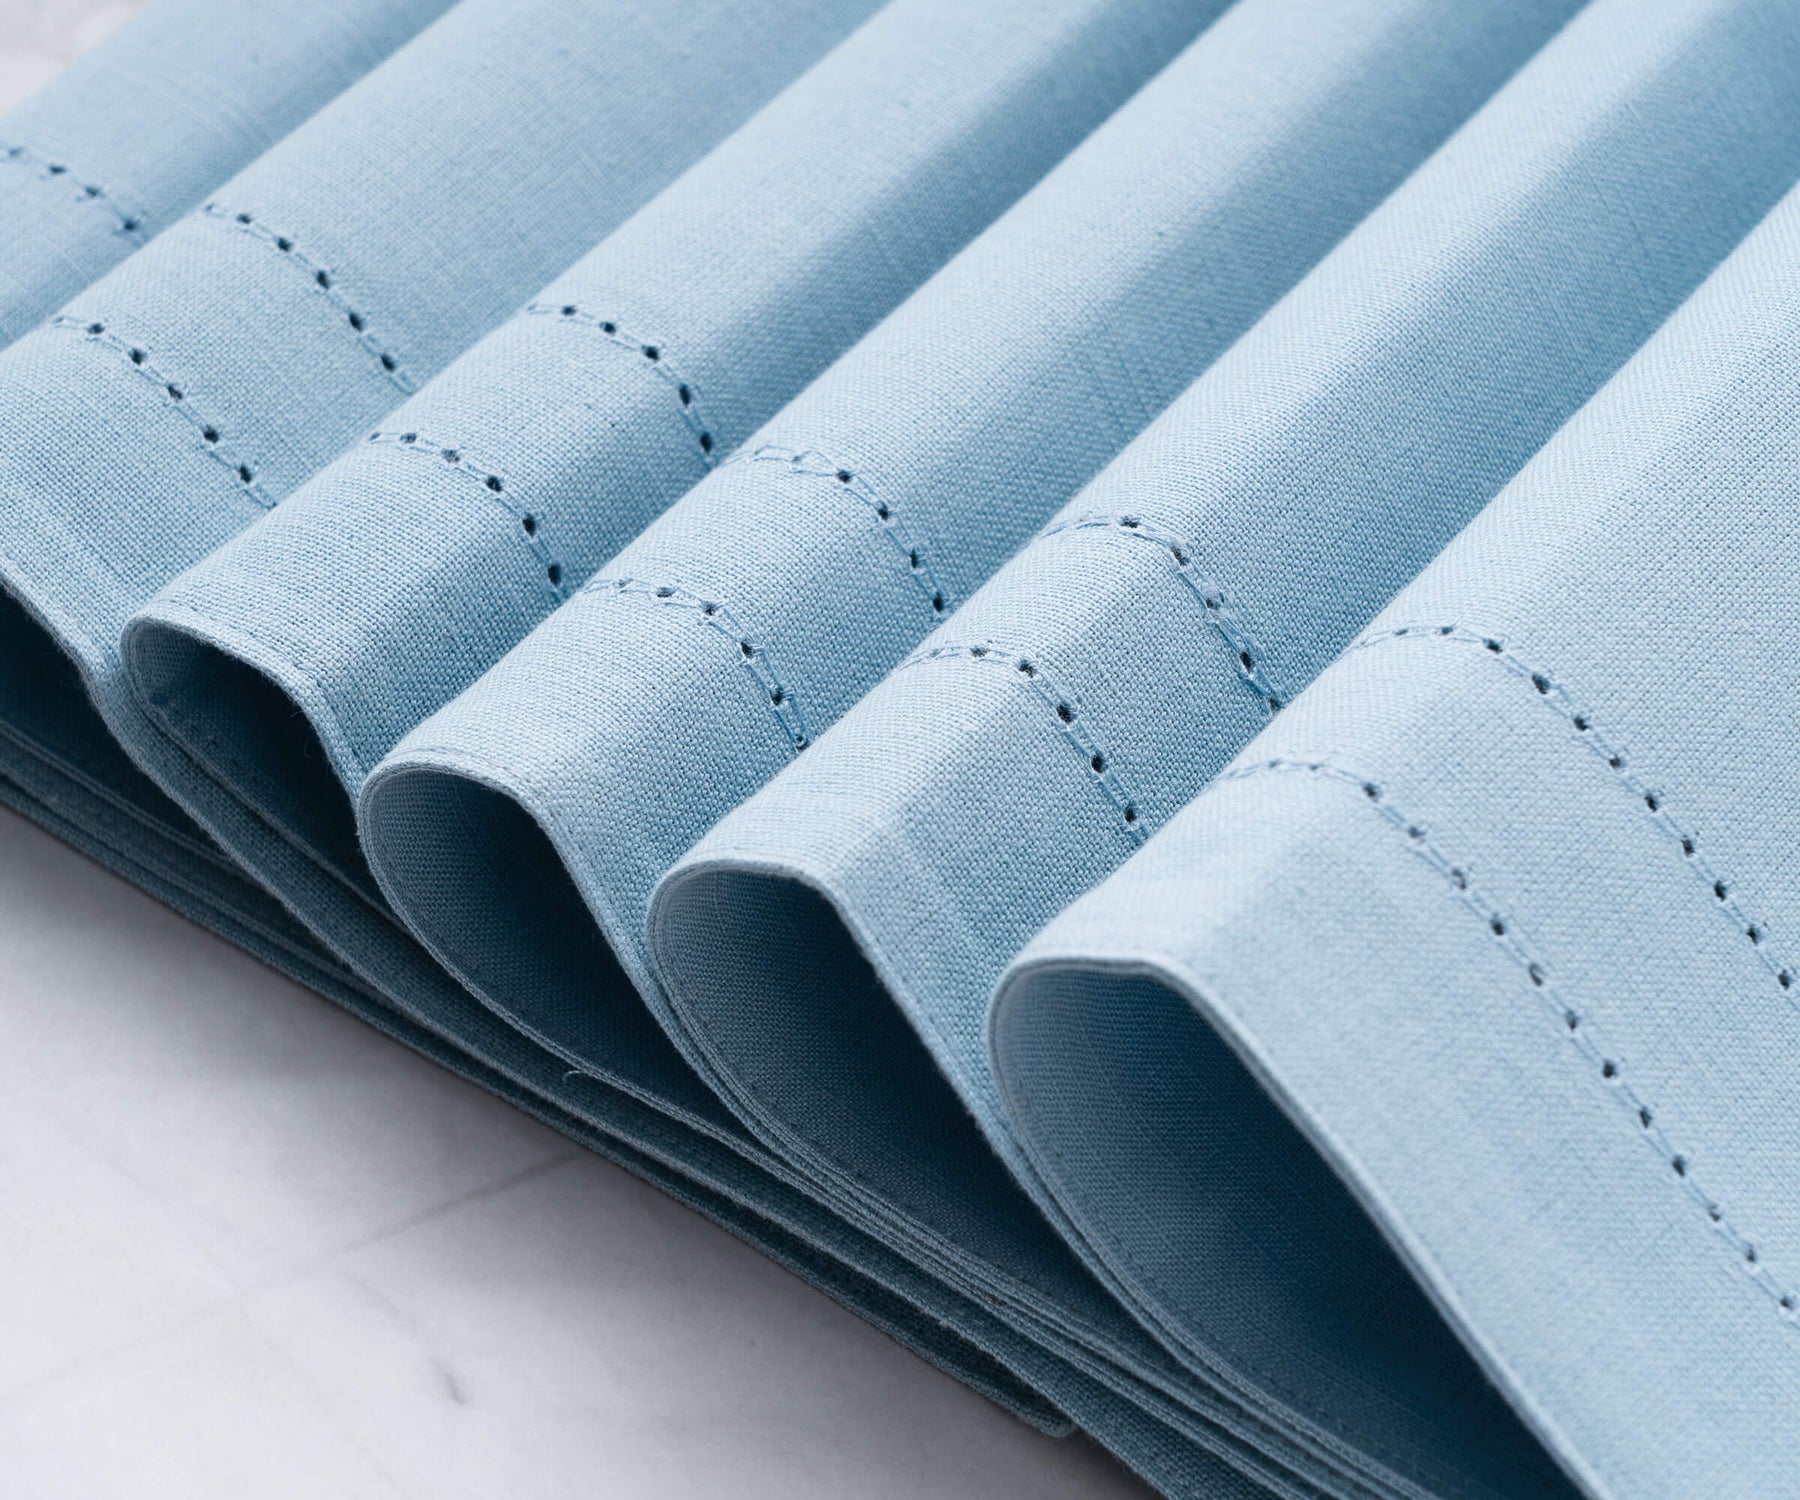 BLue placemats - Add a touch of elegance to your table with these striking fabric placemats.